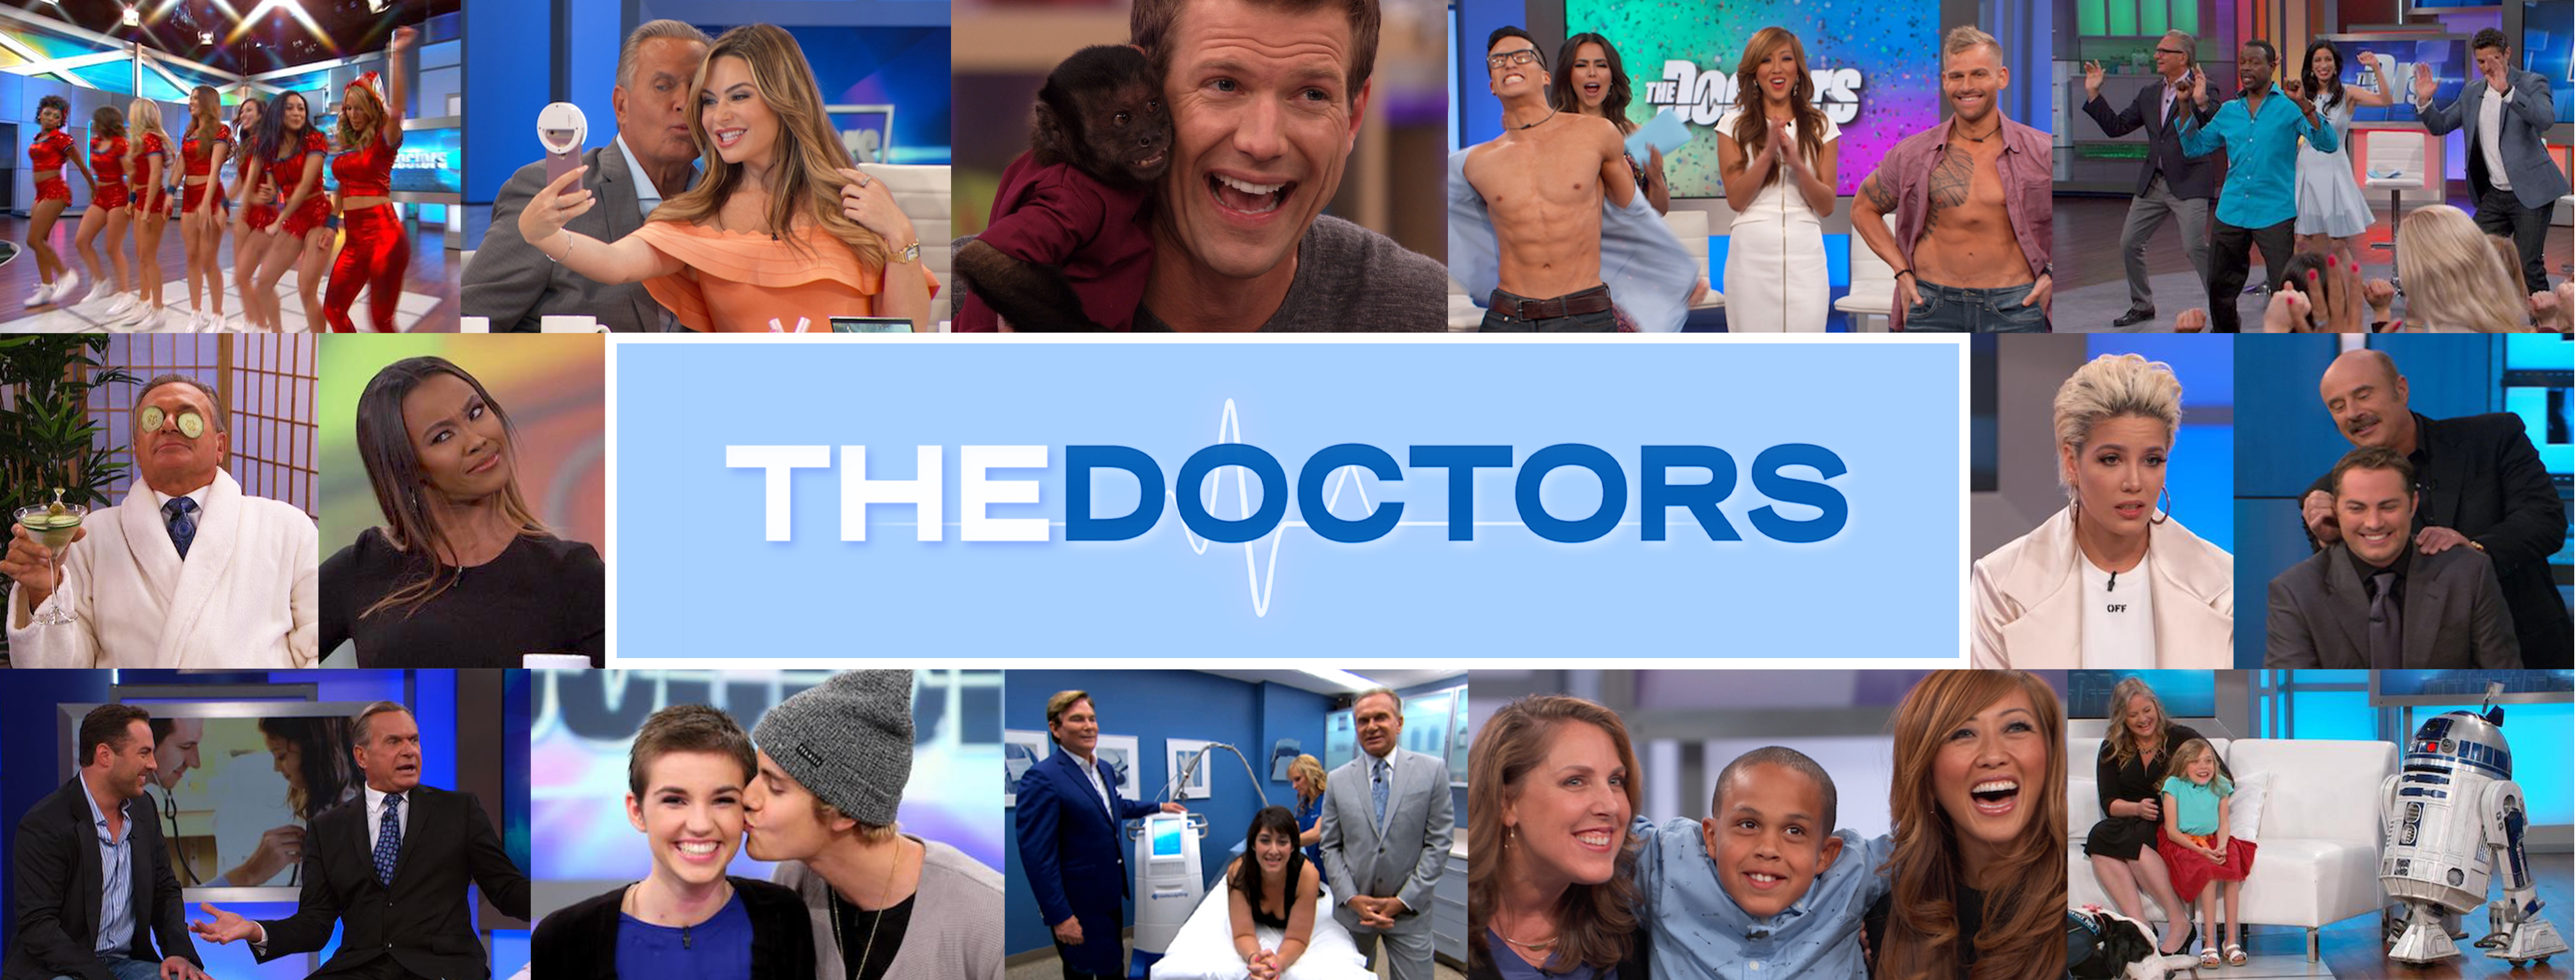 Woman Addicted to Exercising 8 Hours a Day Returns Transformed | The Doctors  TV Show